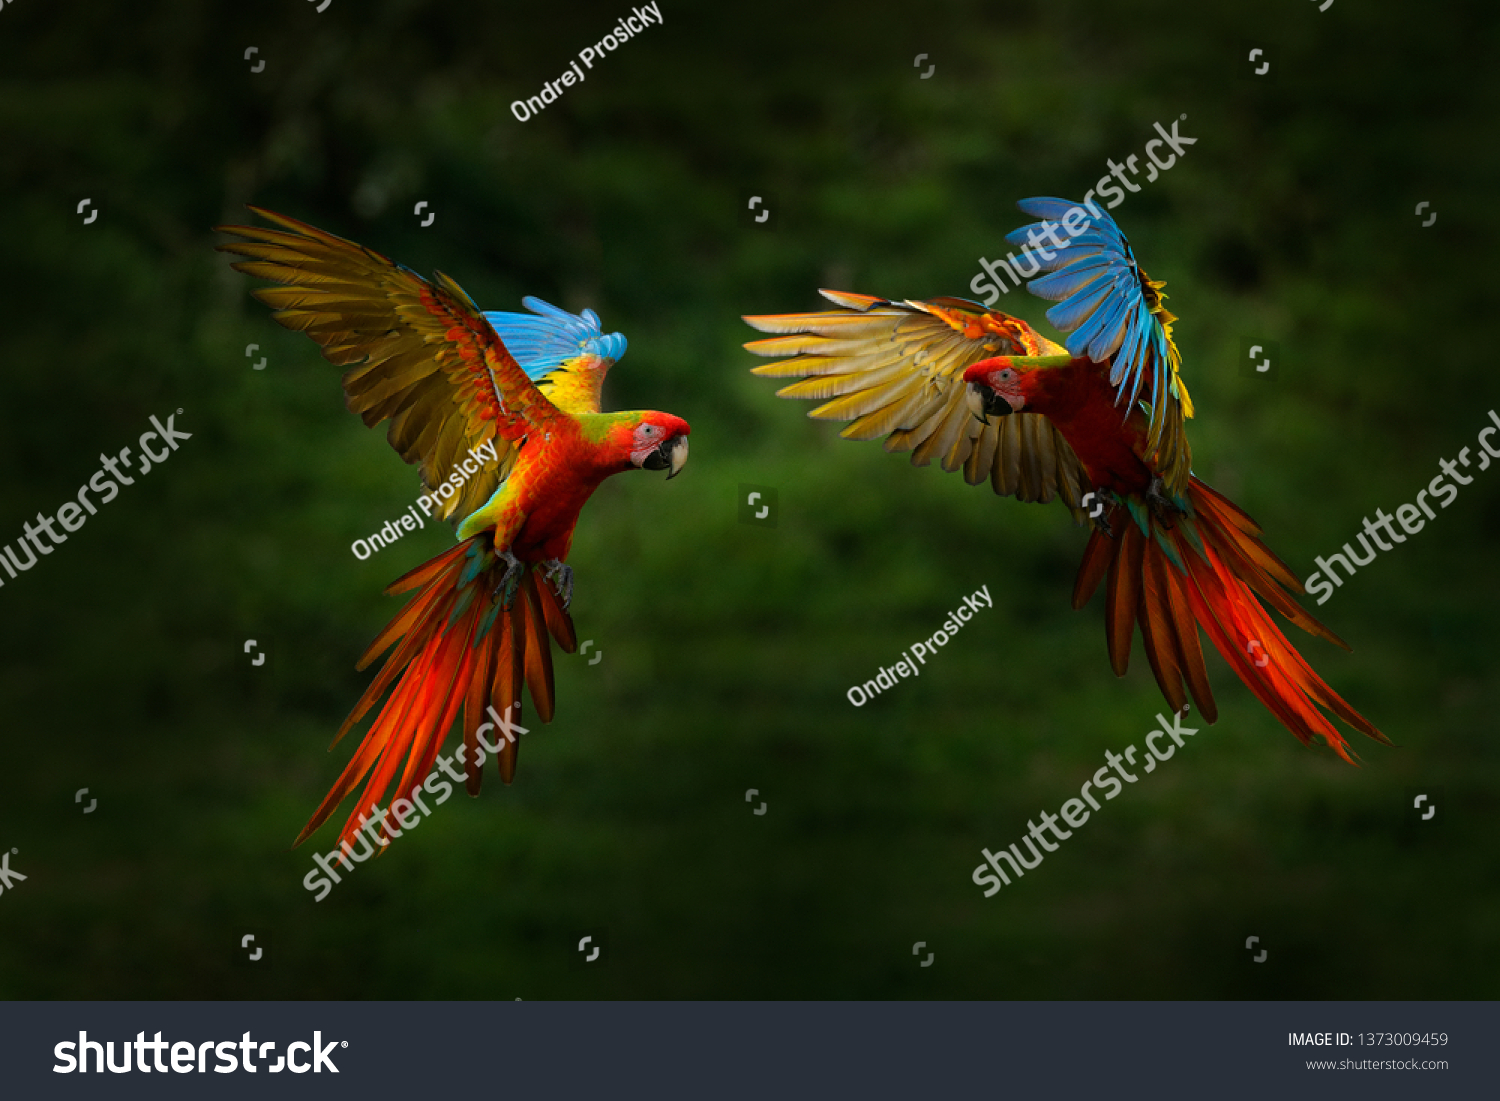 Hybrid parrots in forest. Macaw parrot flying in dark green vegetation. Rare form Ara macao x Ara ambigua, in tropical forest, Costa Rica. Wildlife scene from tropical nature. Red bird in fly, jungle. #1373009459